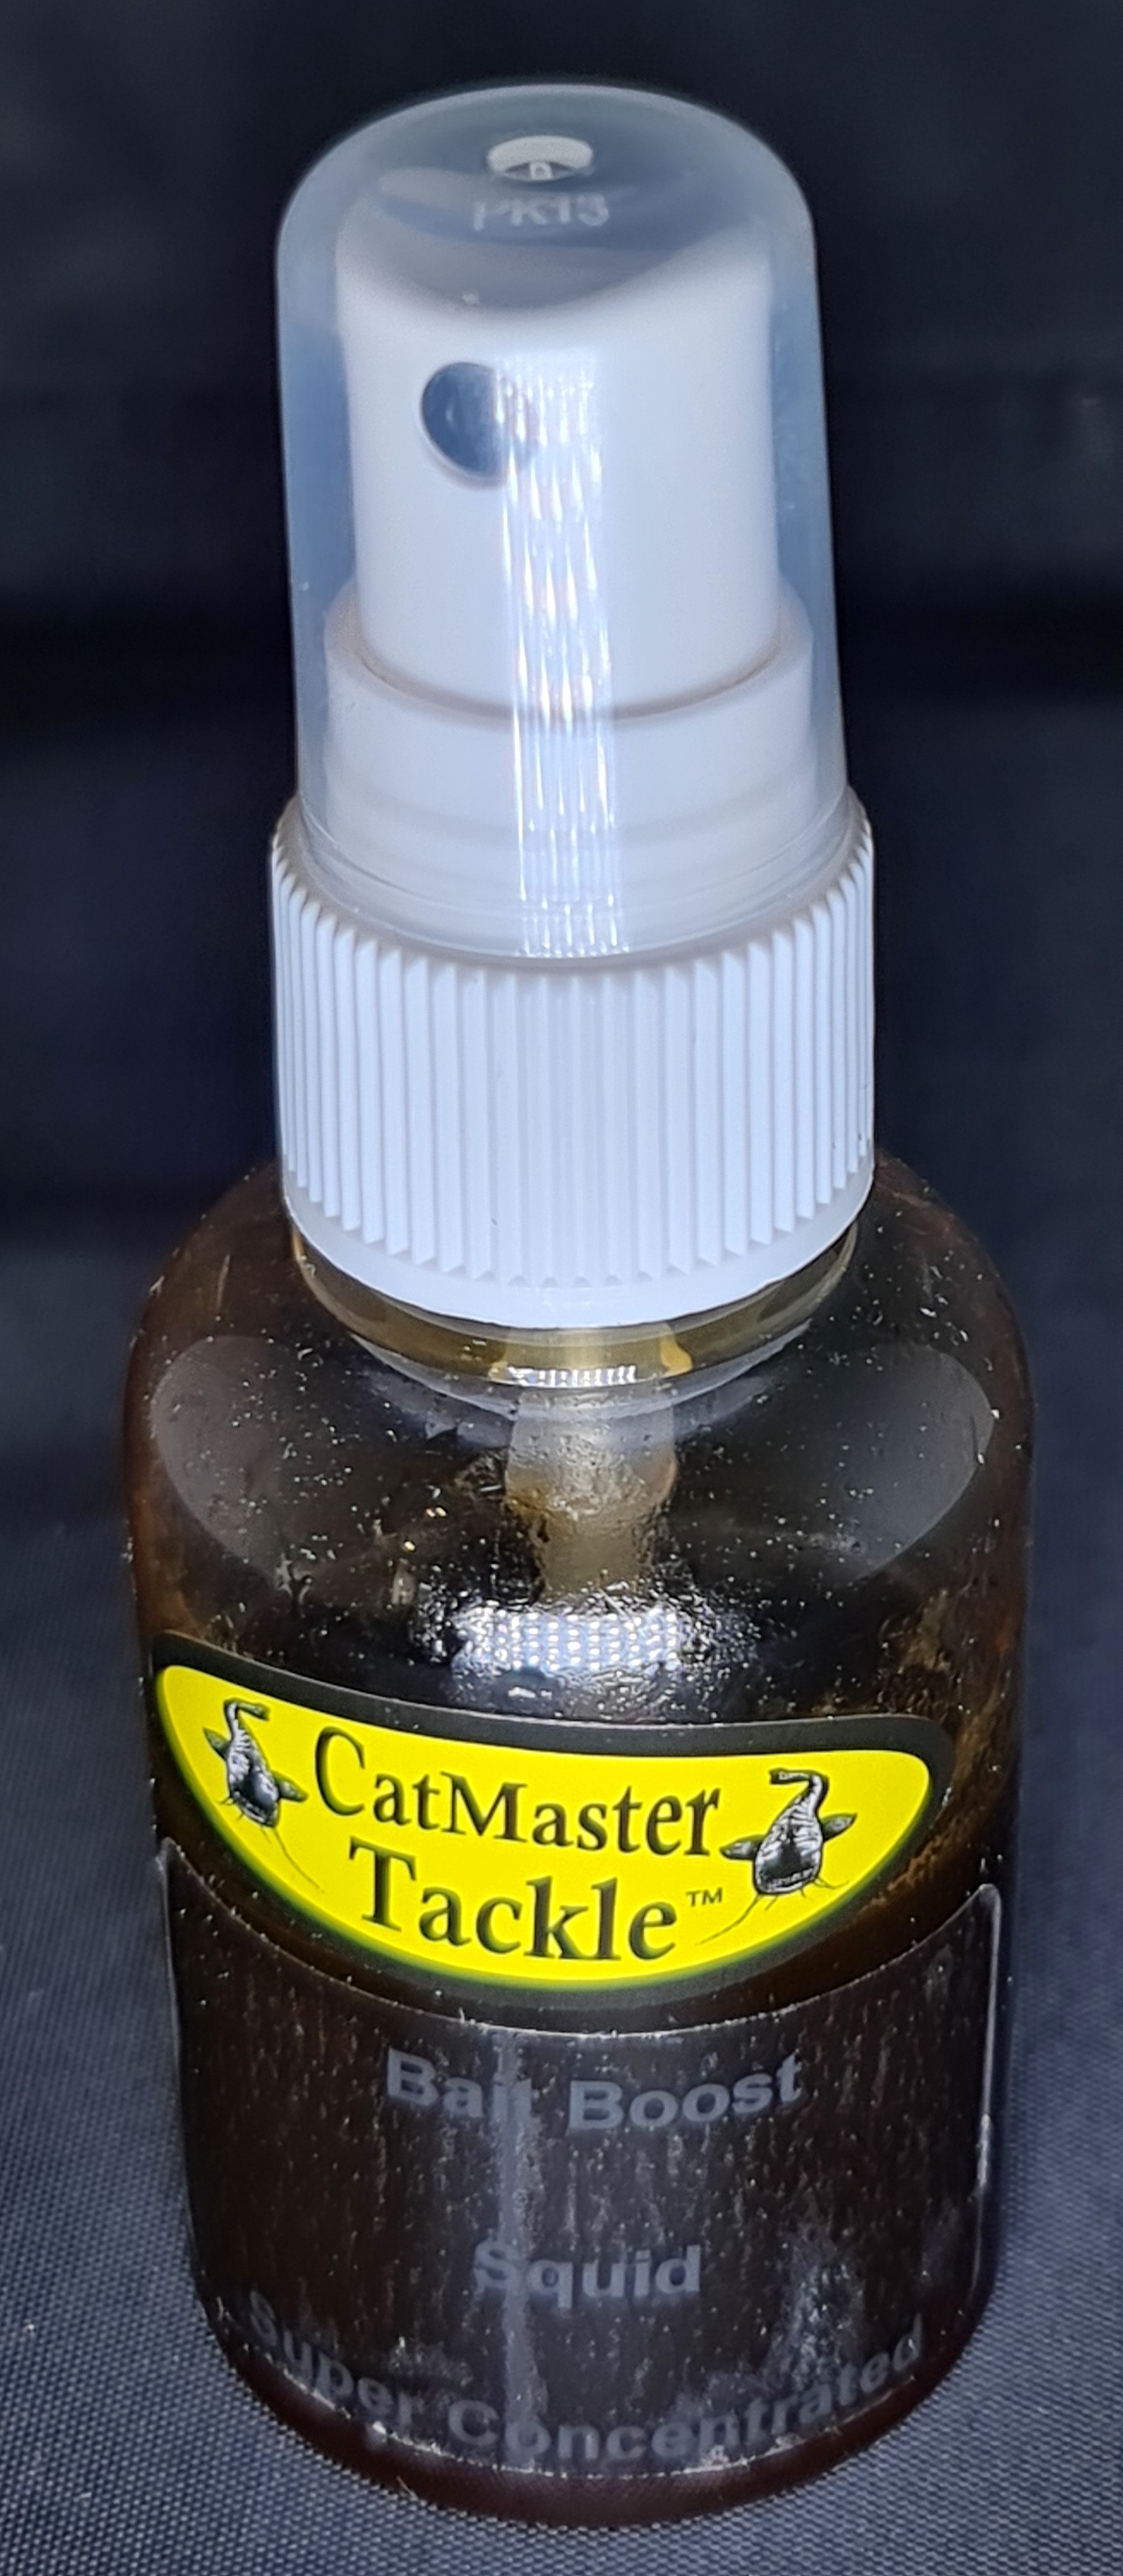 CatMaster Tackle Bait Booster Squid